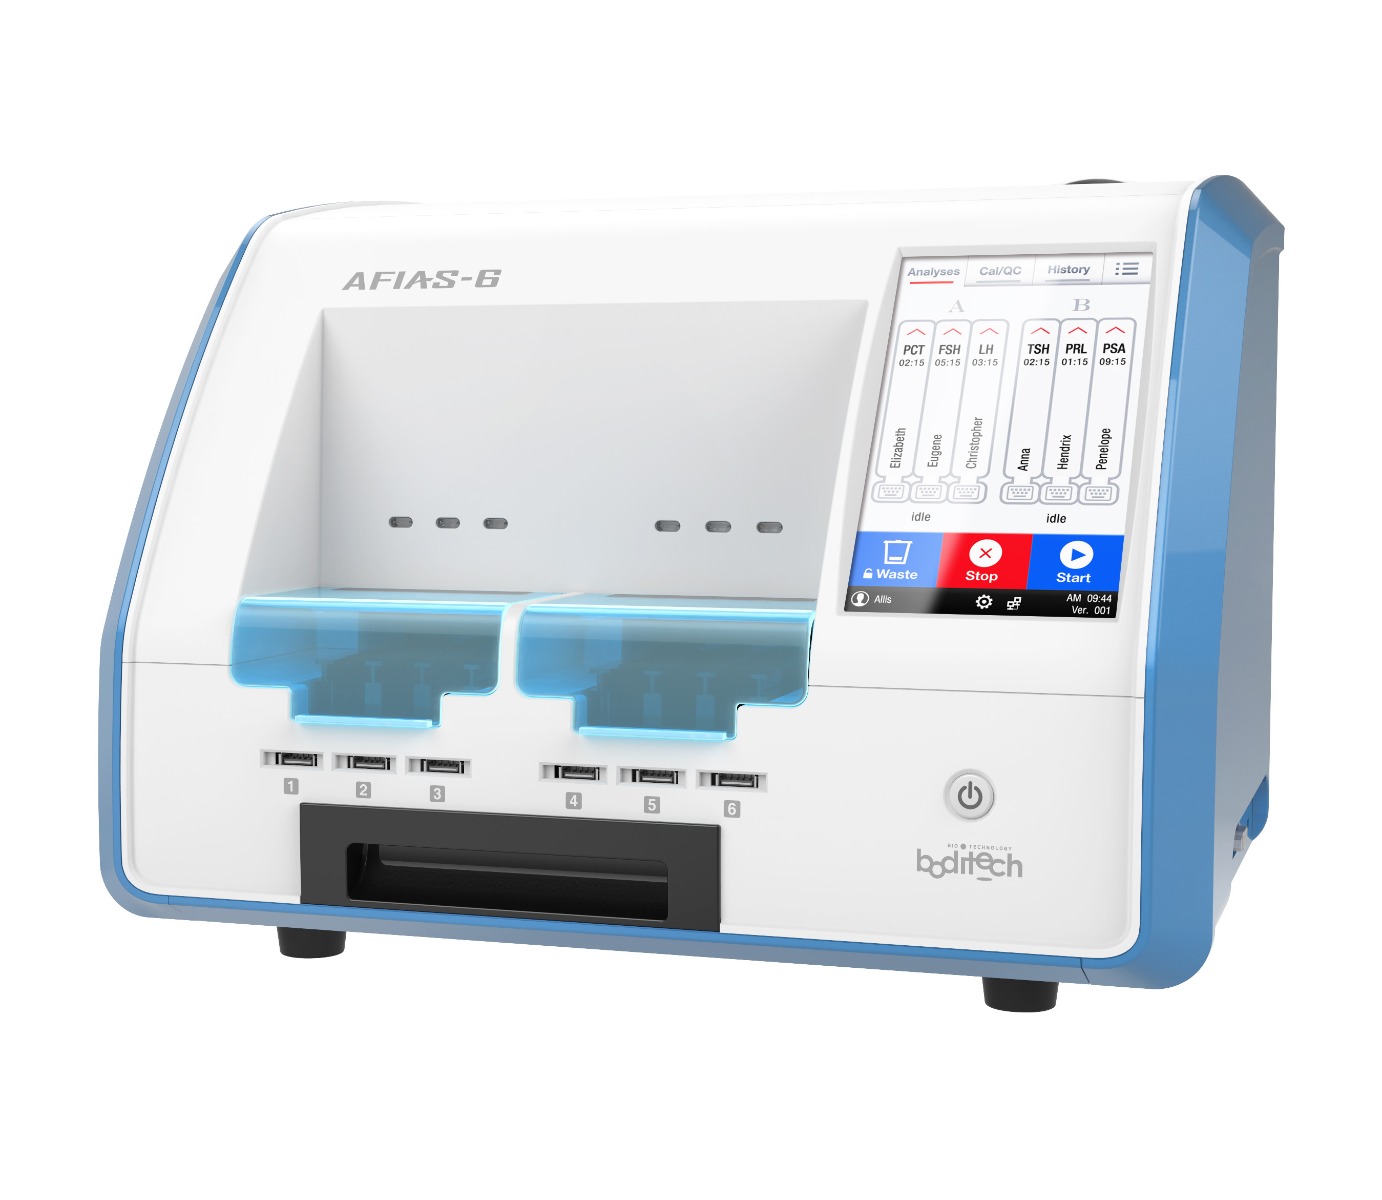 Afias-6 is an advanced immunoassay analyser for multiple testing with all-in-one cartridge system